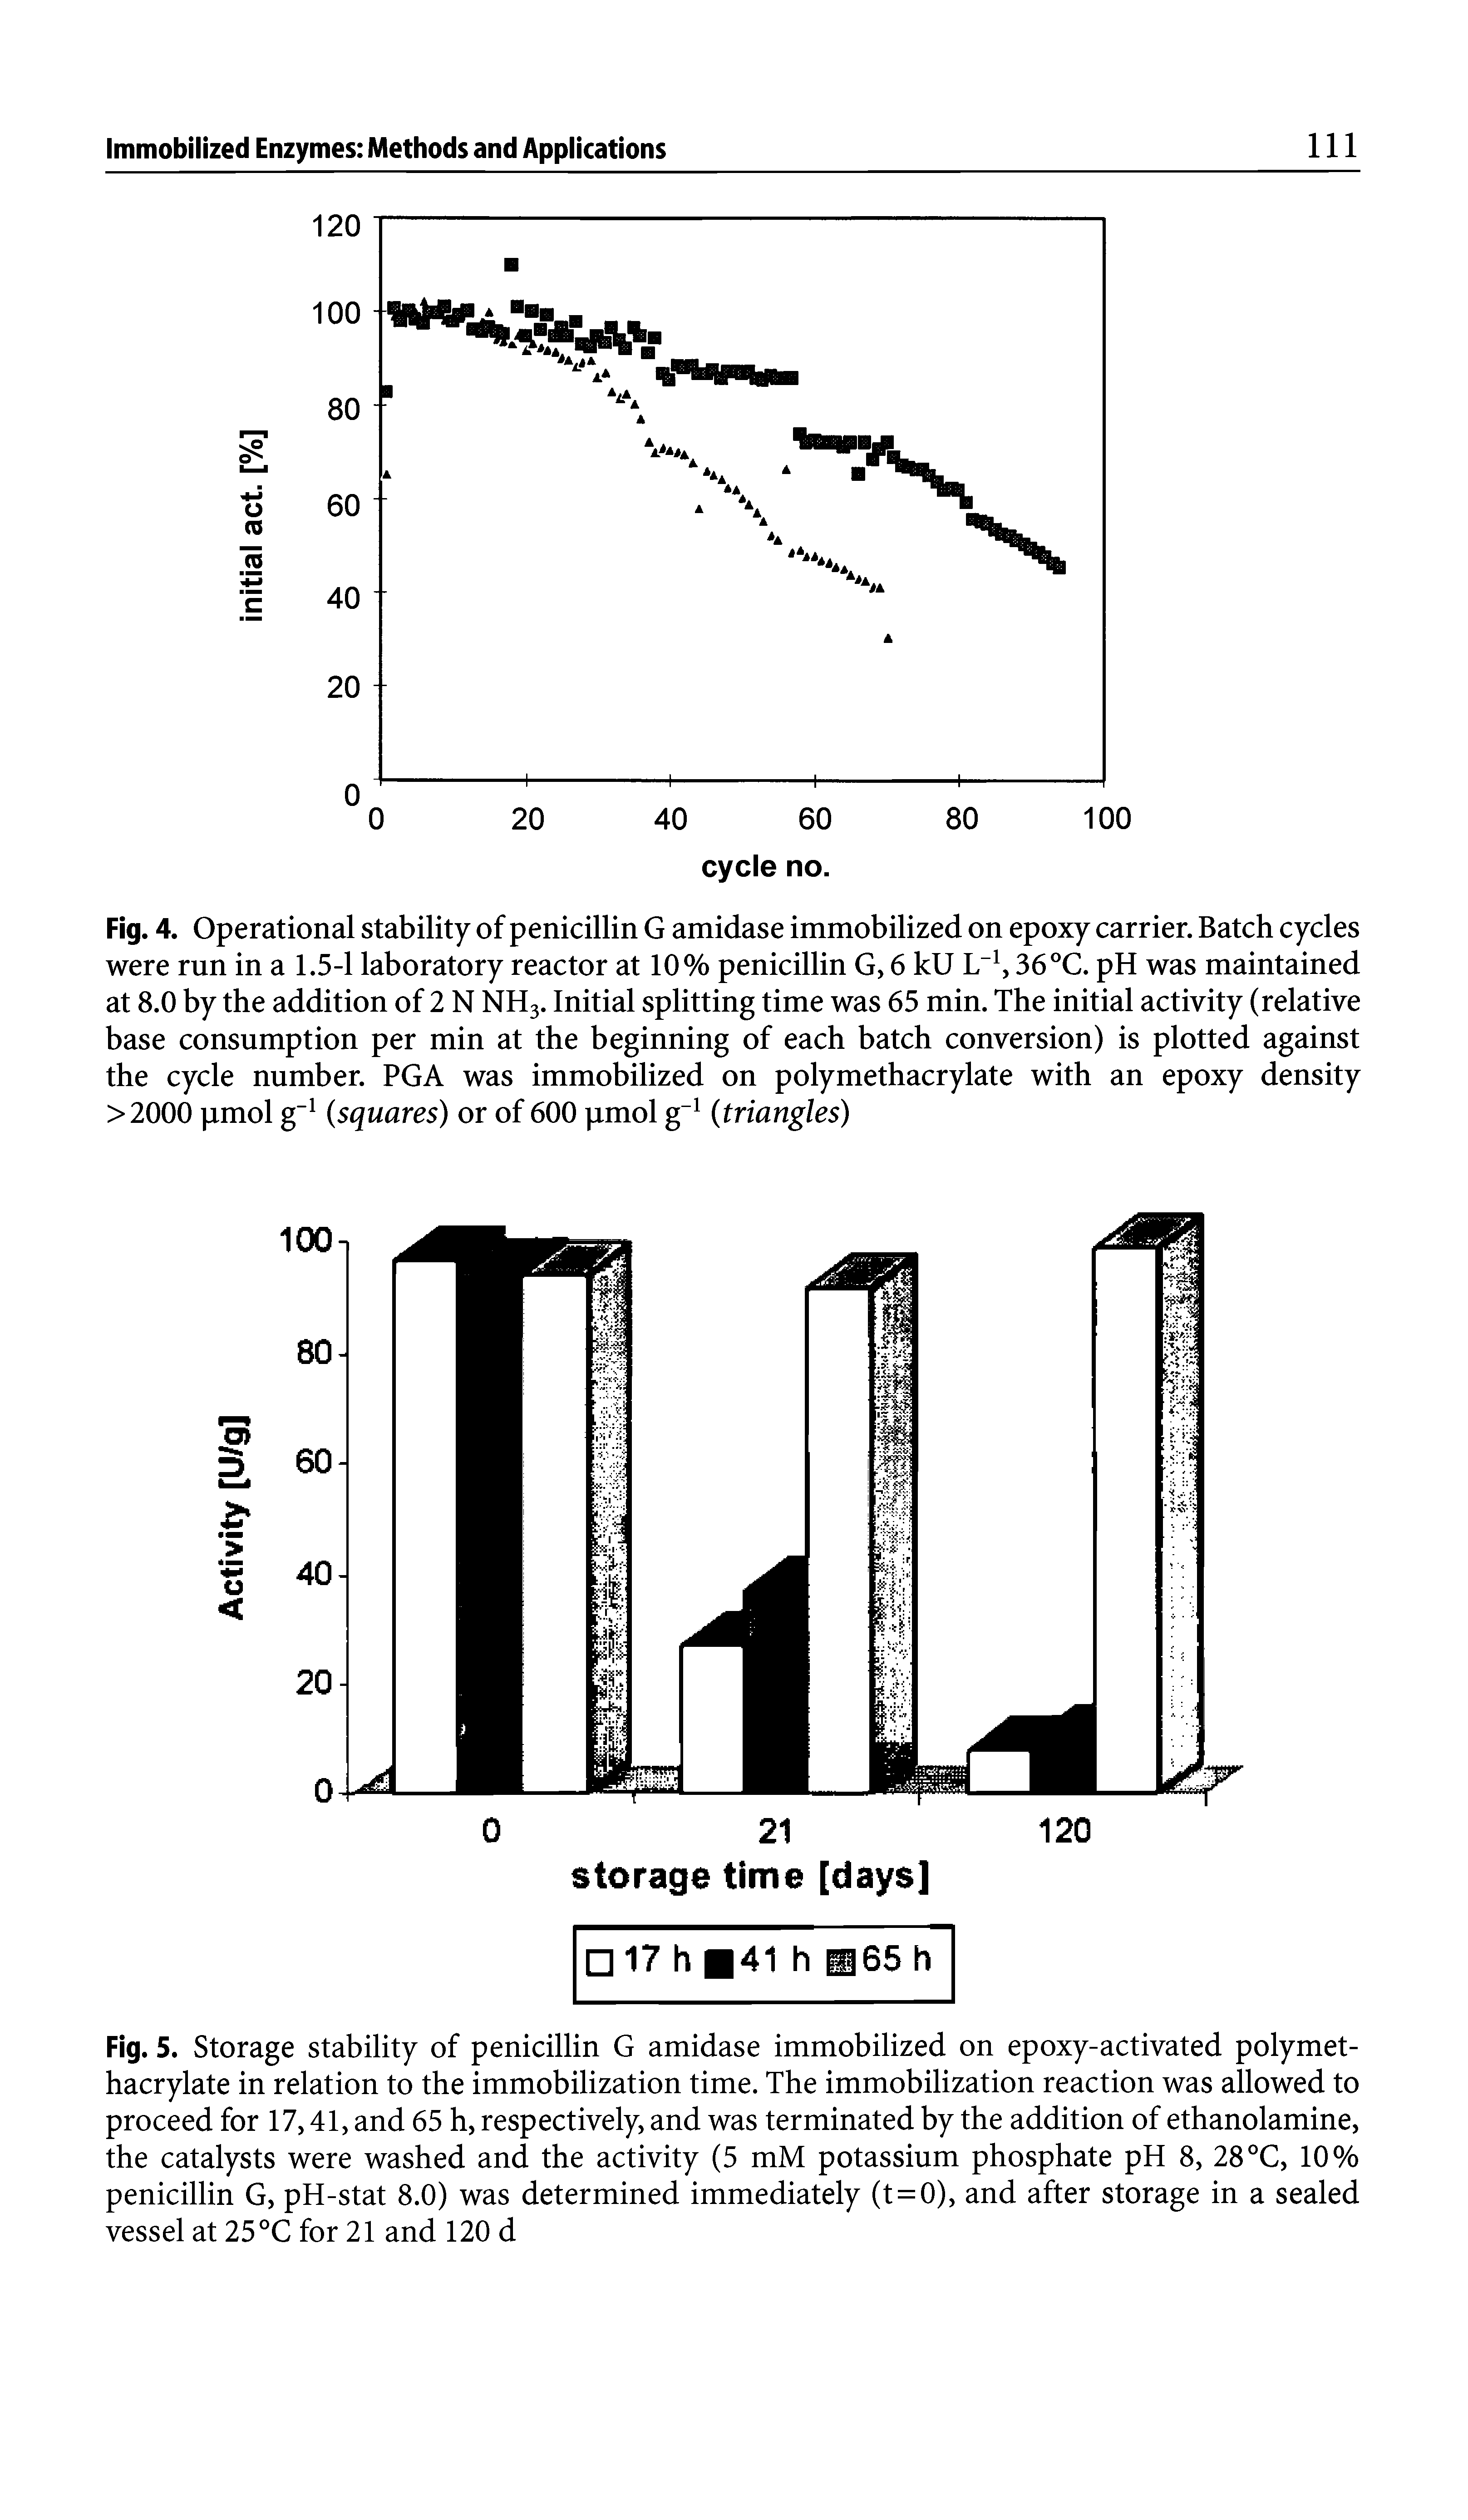 Fig. 4. Operational stability of penicillin G amidase immobilized on epoxy carrier. Batch cycles were run in a 1.5-1 laboratory reactor at 10% penicillin G, 6 kU L 36 °C. pH was maintained at 8.0 by the addition of 2 N NH3. Initial splitting time was 65 min. The initial activity (relative base consumption per min at the beginning of each batch conversion) is plotted against the cycle number. PGA was immobilized on polymethacrylate with an epoxy density >2000 pmol g" (squares) or of 600 pmol g" (triangles)...